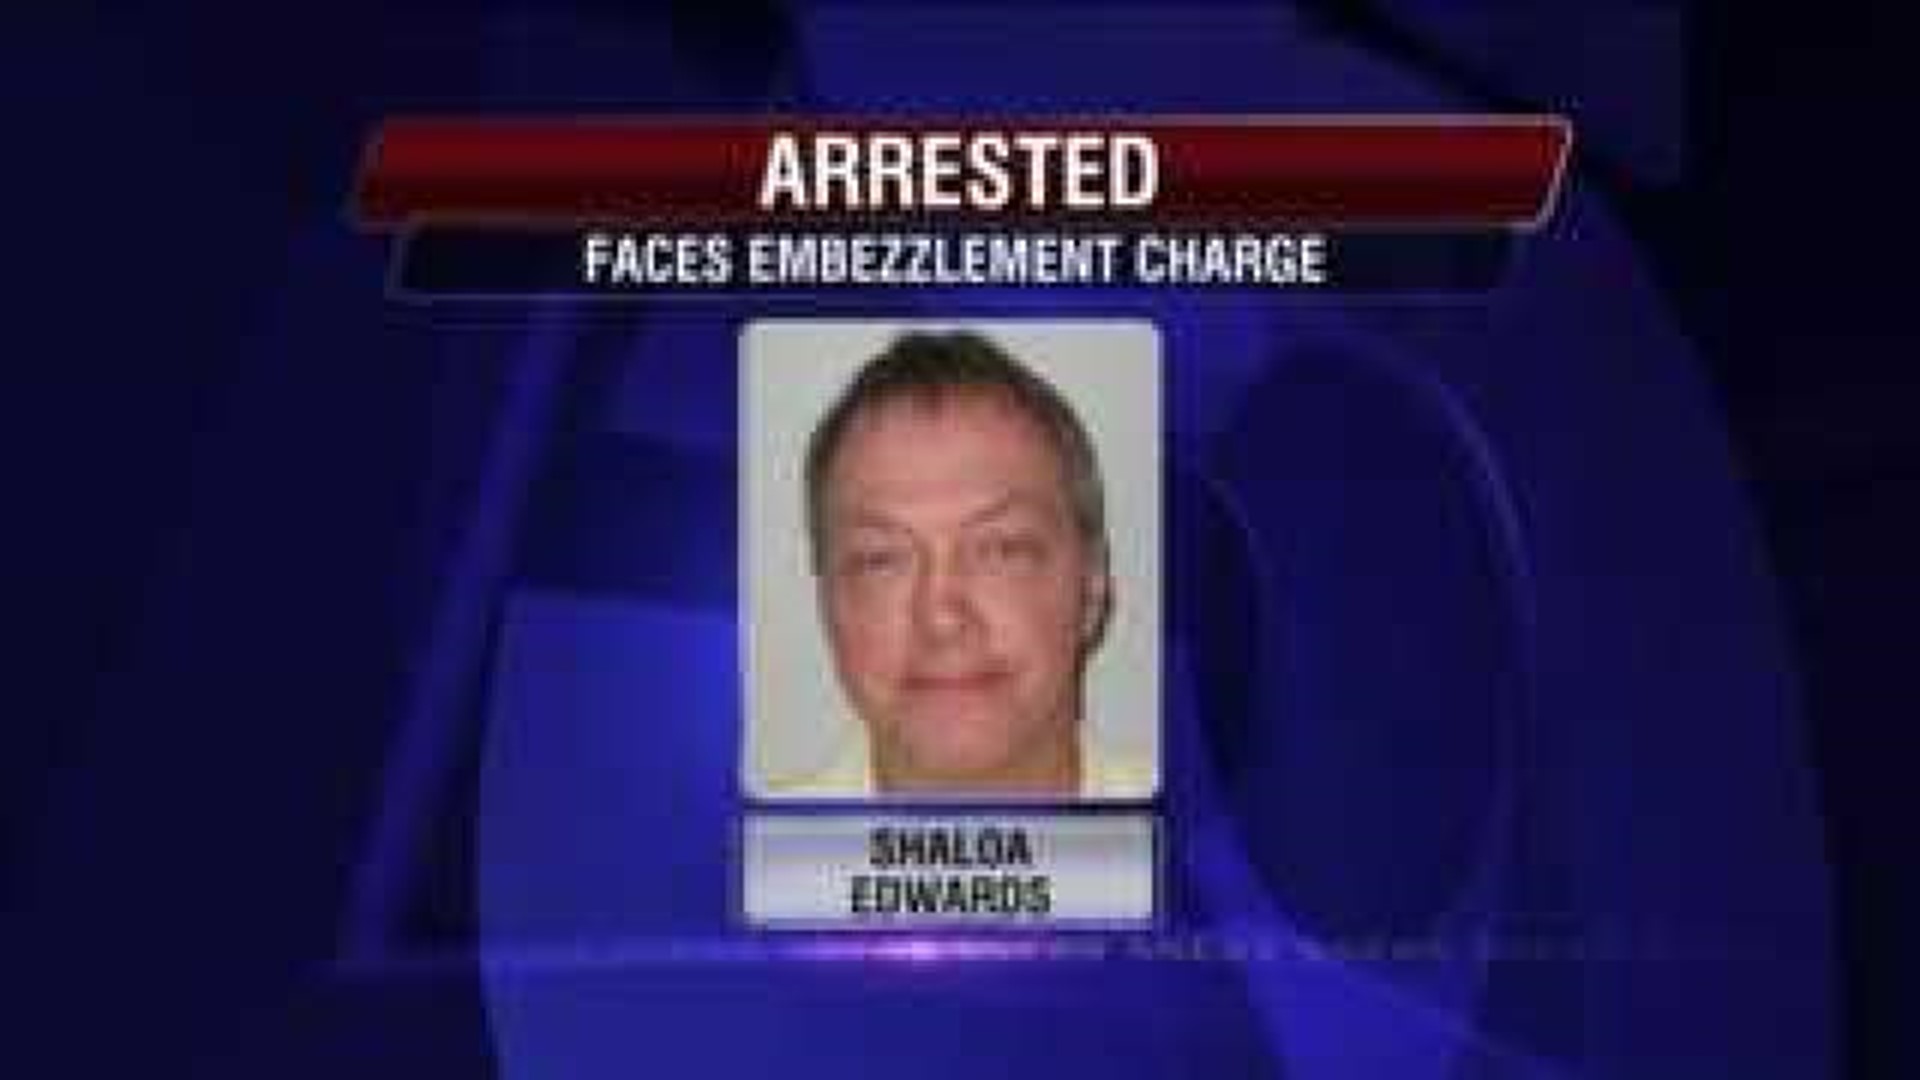 Sallisaw Police Chief Arrested, Suspected Of Embezzlement